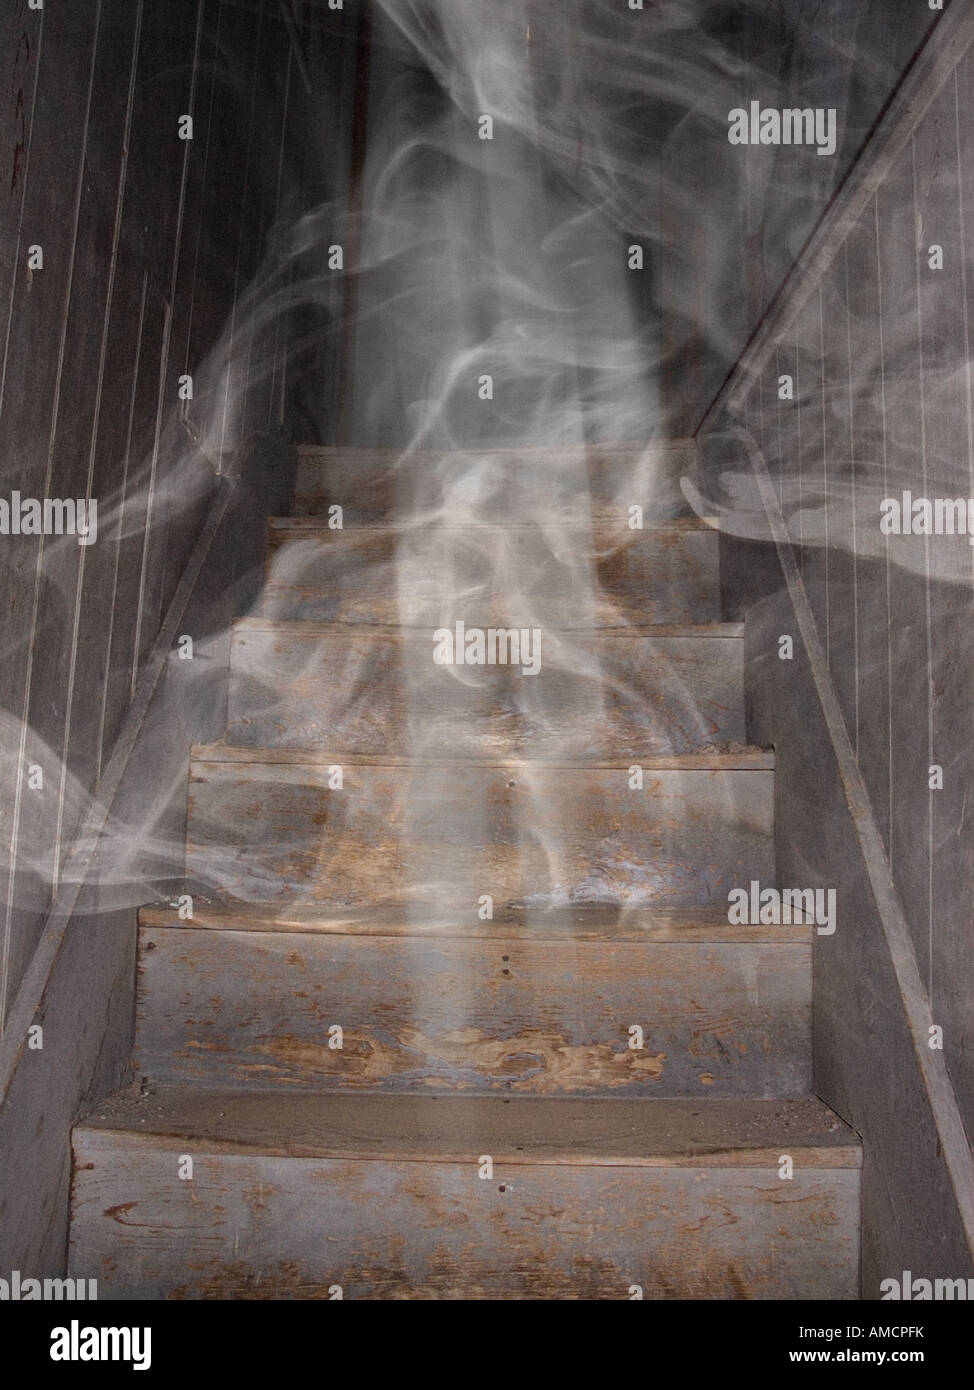 Ghost descending stairs Stock Photo